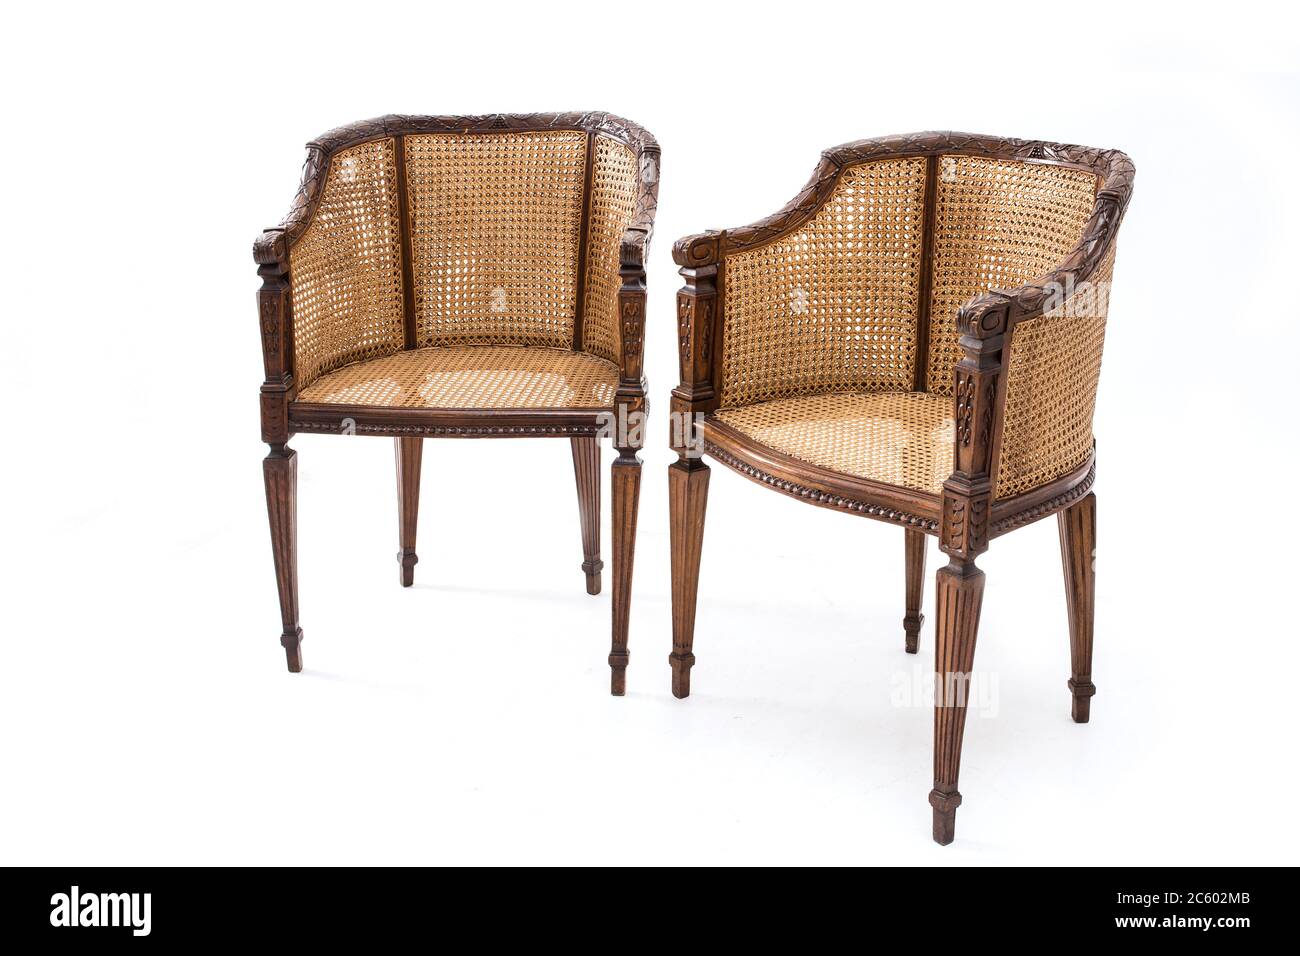 Pair of old fashioned wood armchairs on the white background. Stock Photo